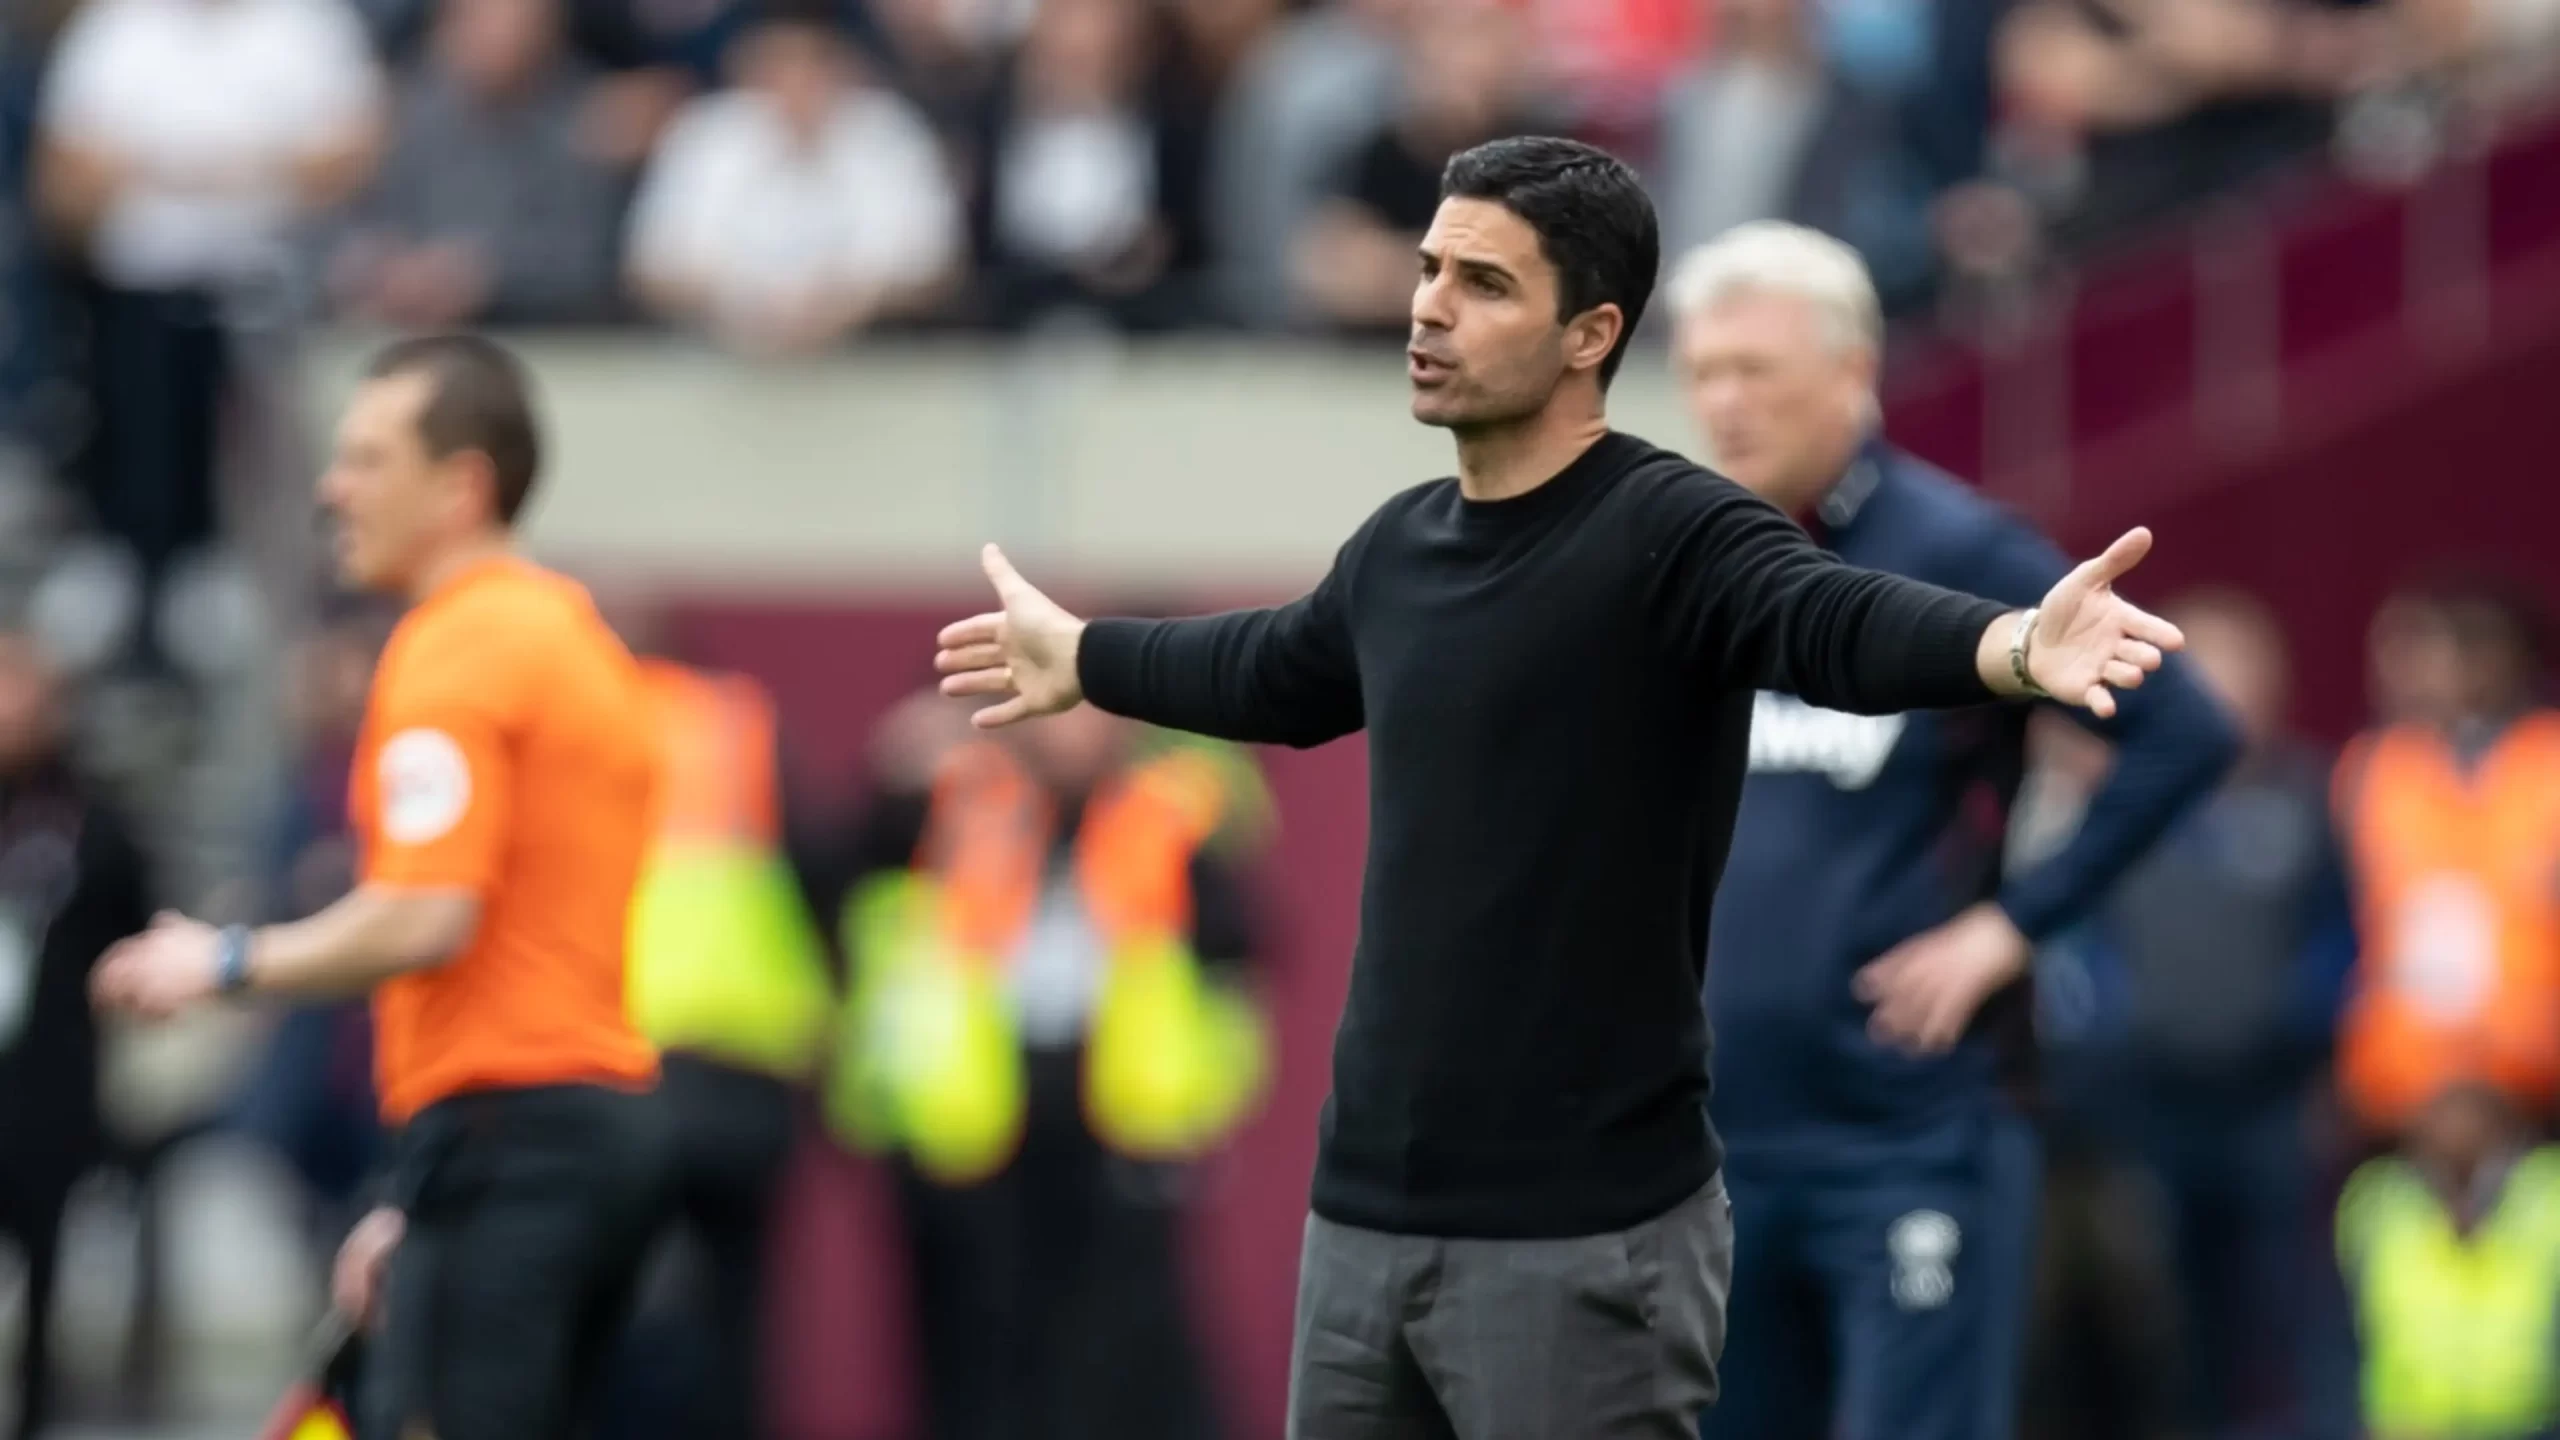 Mikel Arteta admits Arsenal ‘lacked killer instinct’ after throwing away another two-goal lead against West Ham as Gunners boss questions his side’s mentality